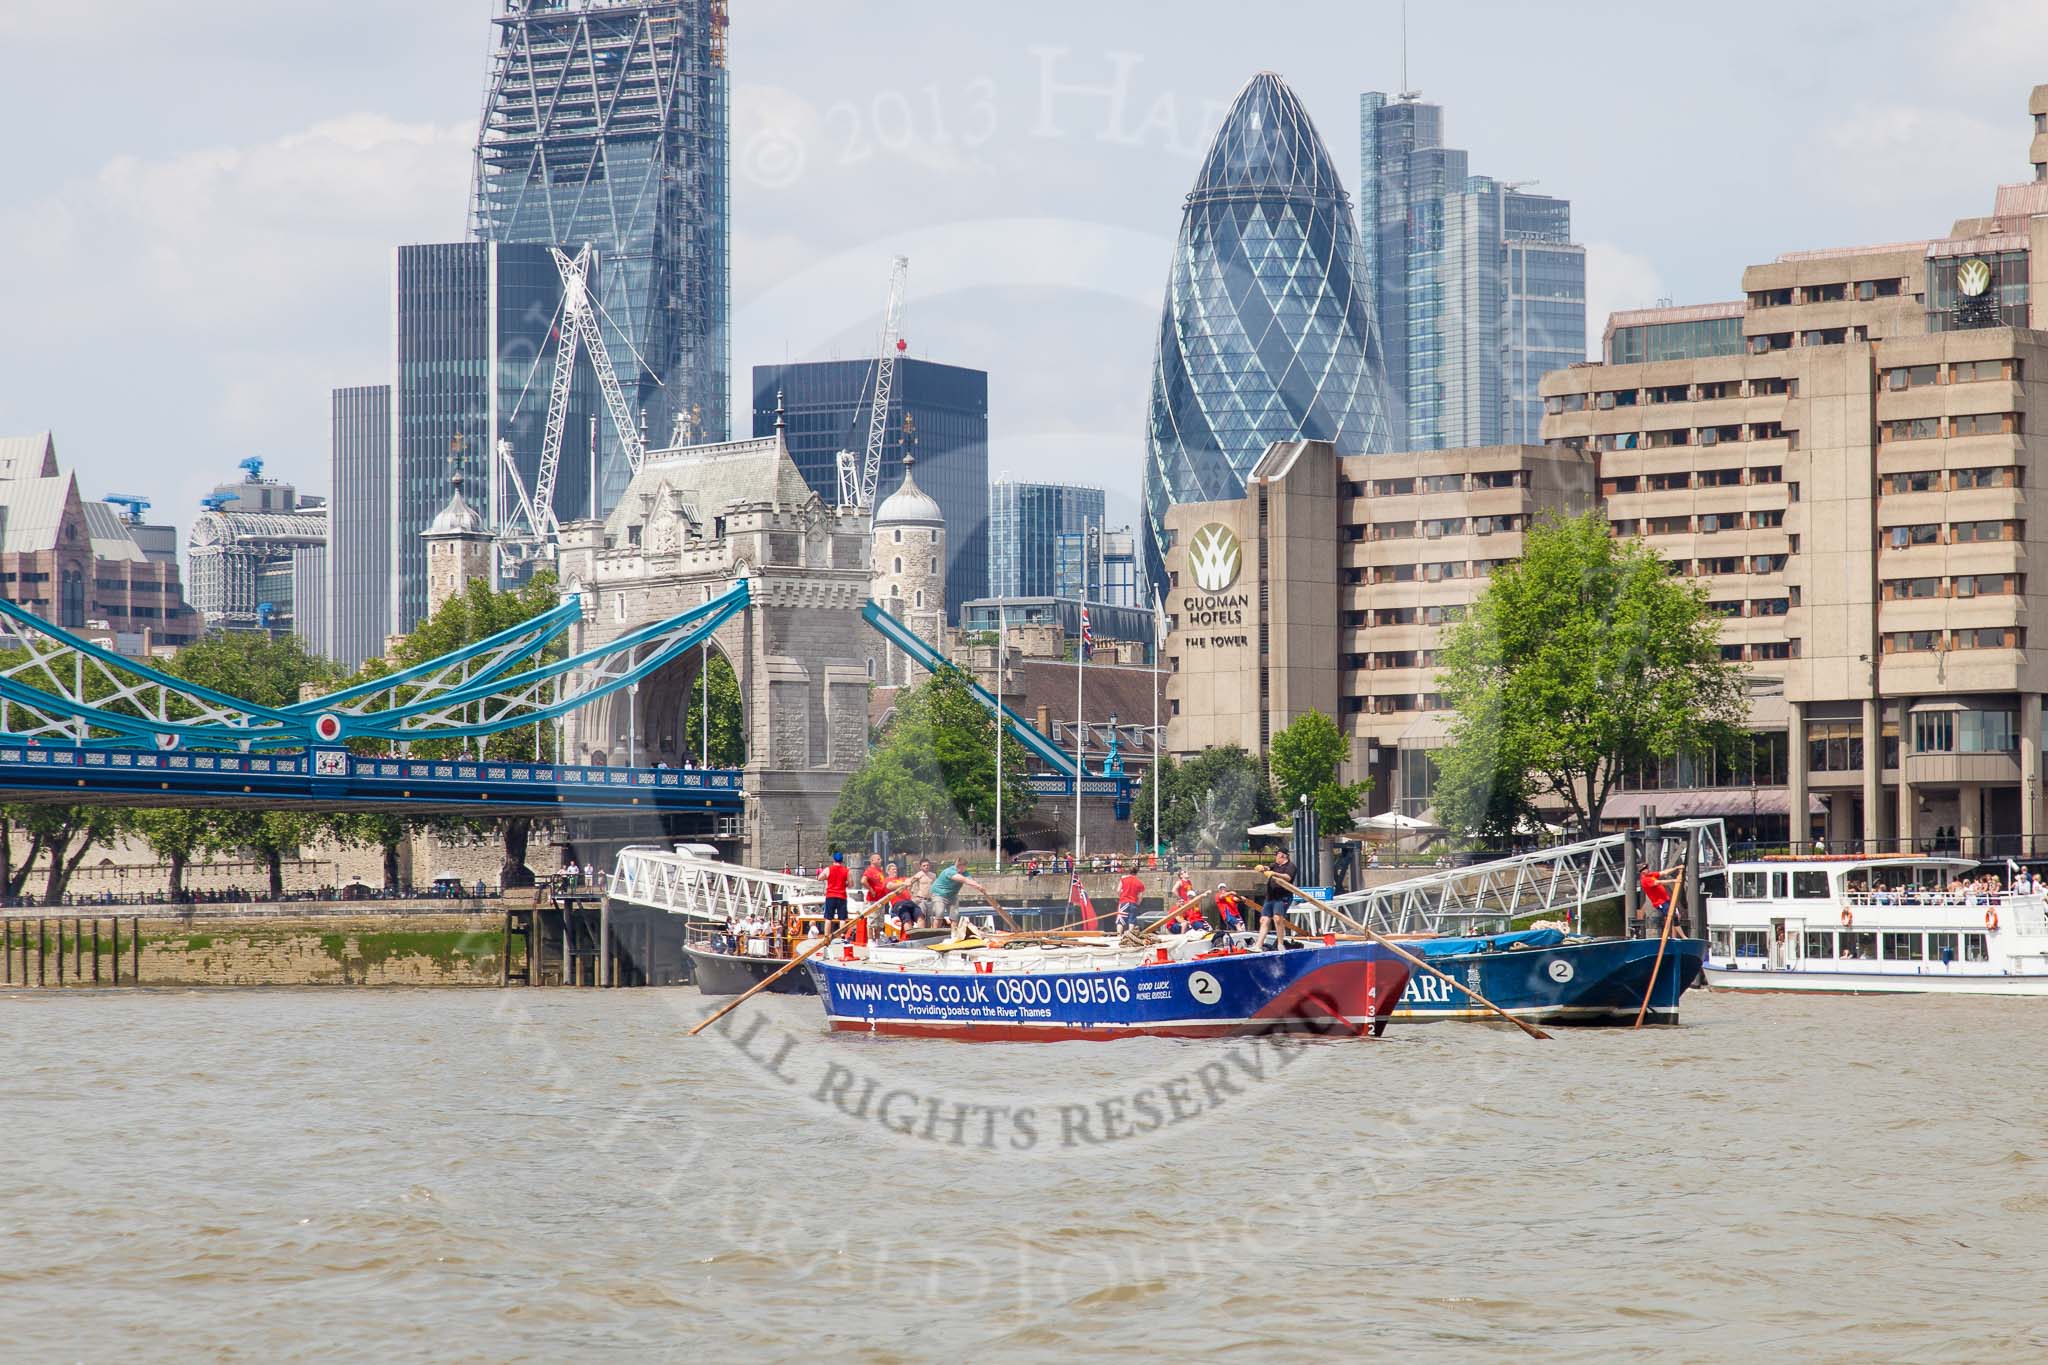 TOW River Thames Barge Driving Race 2013: Barge "Steve Faldo" by Capital Pleasure Boats, and barge "Diana", by Trinity Buoy Wharf, behind, approaching Tower Bridge, with the "Gherkin" building on the right..
River Thames between Greenwich and Westminster,
London,

United Kingdom,
on 13 July 2013 at 13:40, image #377